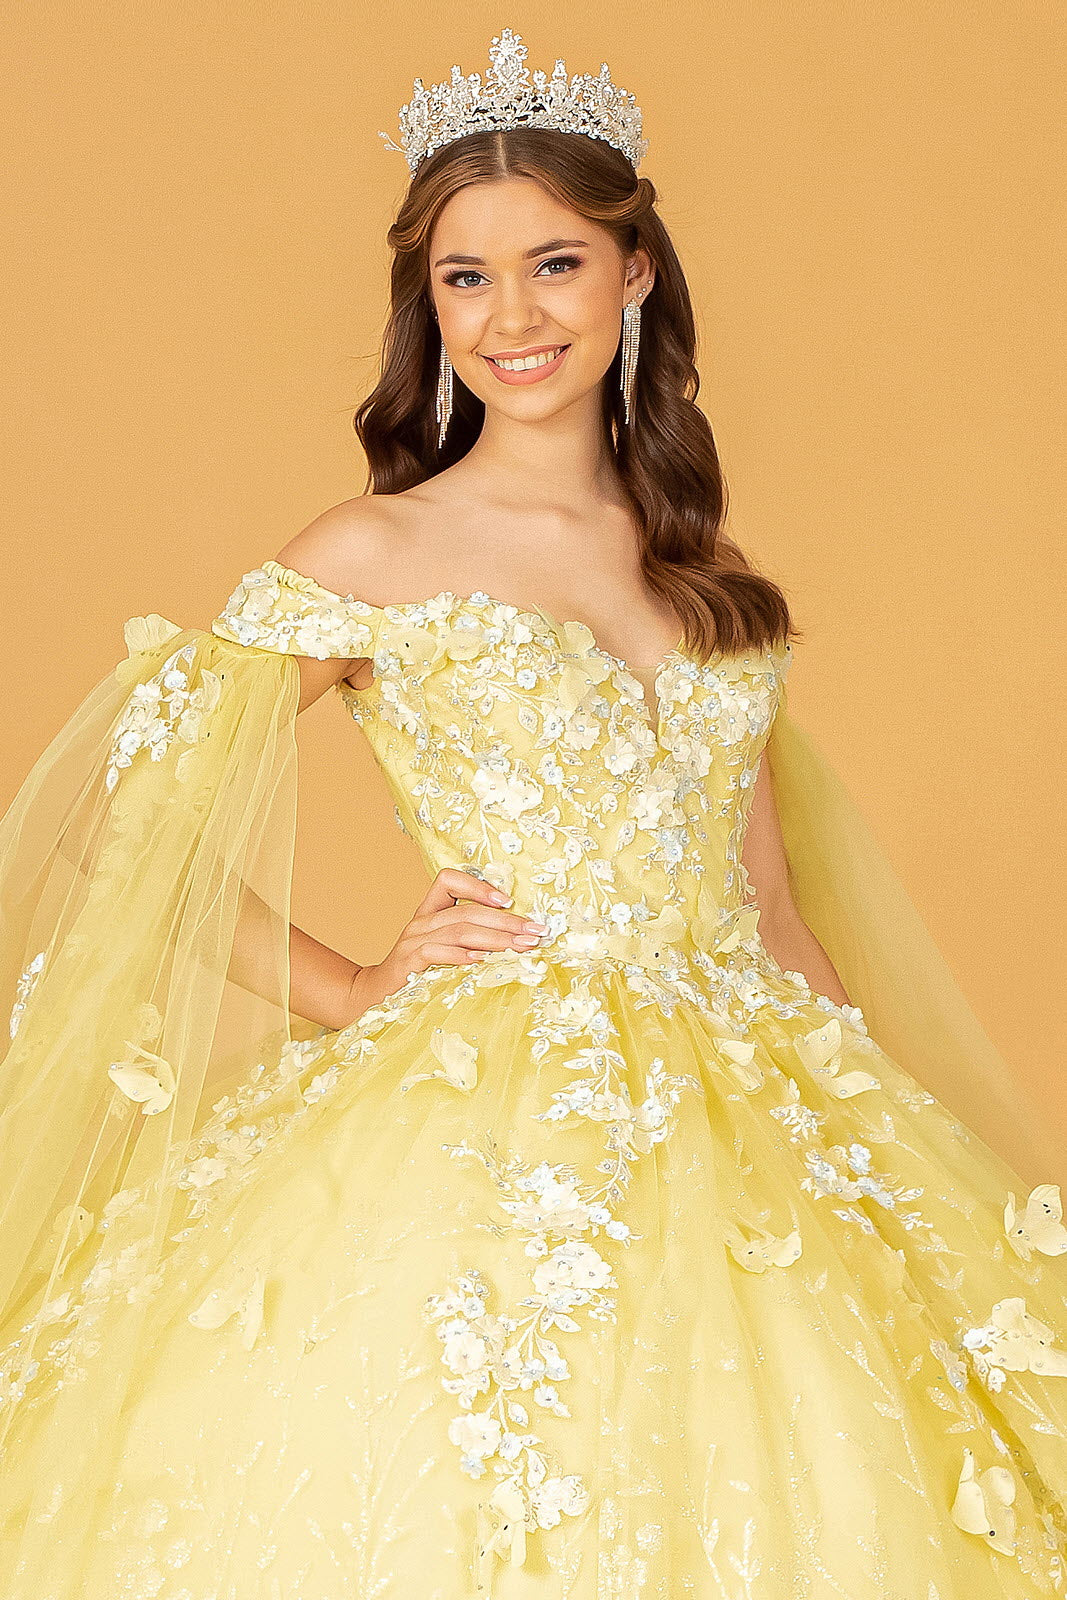 Embroidery Glitter Quinceanera Gown Long Mesh Layer GLGL3111-QUINCEANERA-smcfashion.com